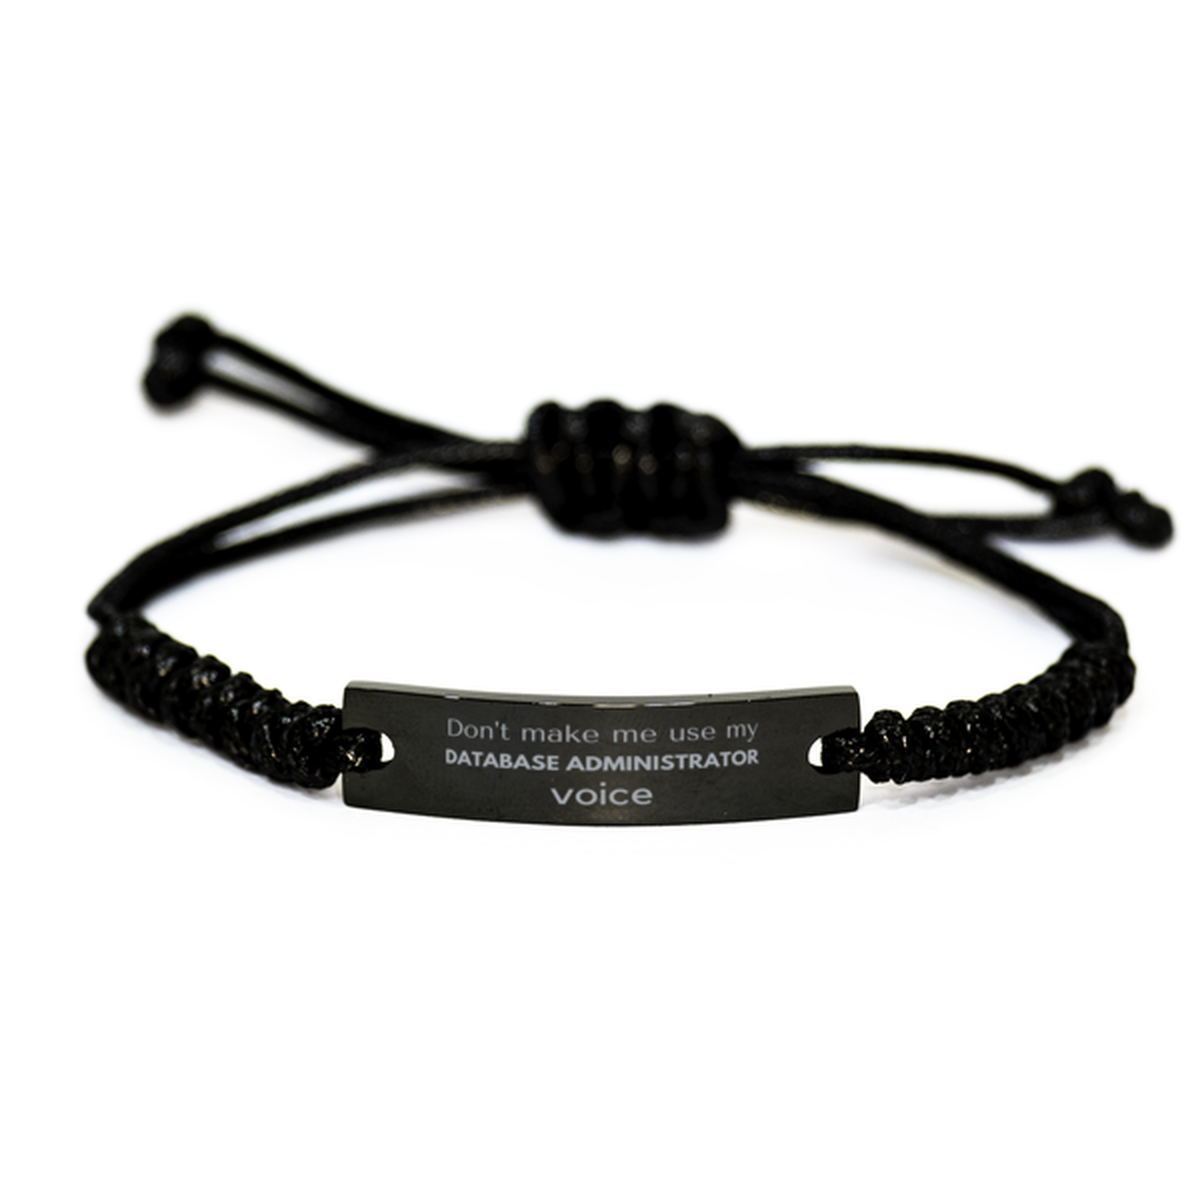 Don't make me use my Database Administrator voice, Sarcasm Database Administrator Gifts, Christmas Database Administrator Black Rope Bracelet Birthday Unique Gifts For Database Administrator Coworkers, Men, Women, Colleague, Friends